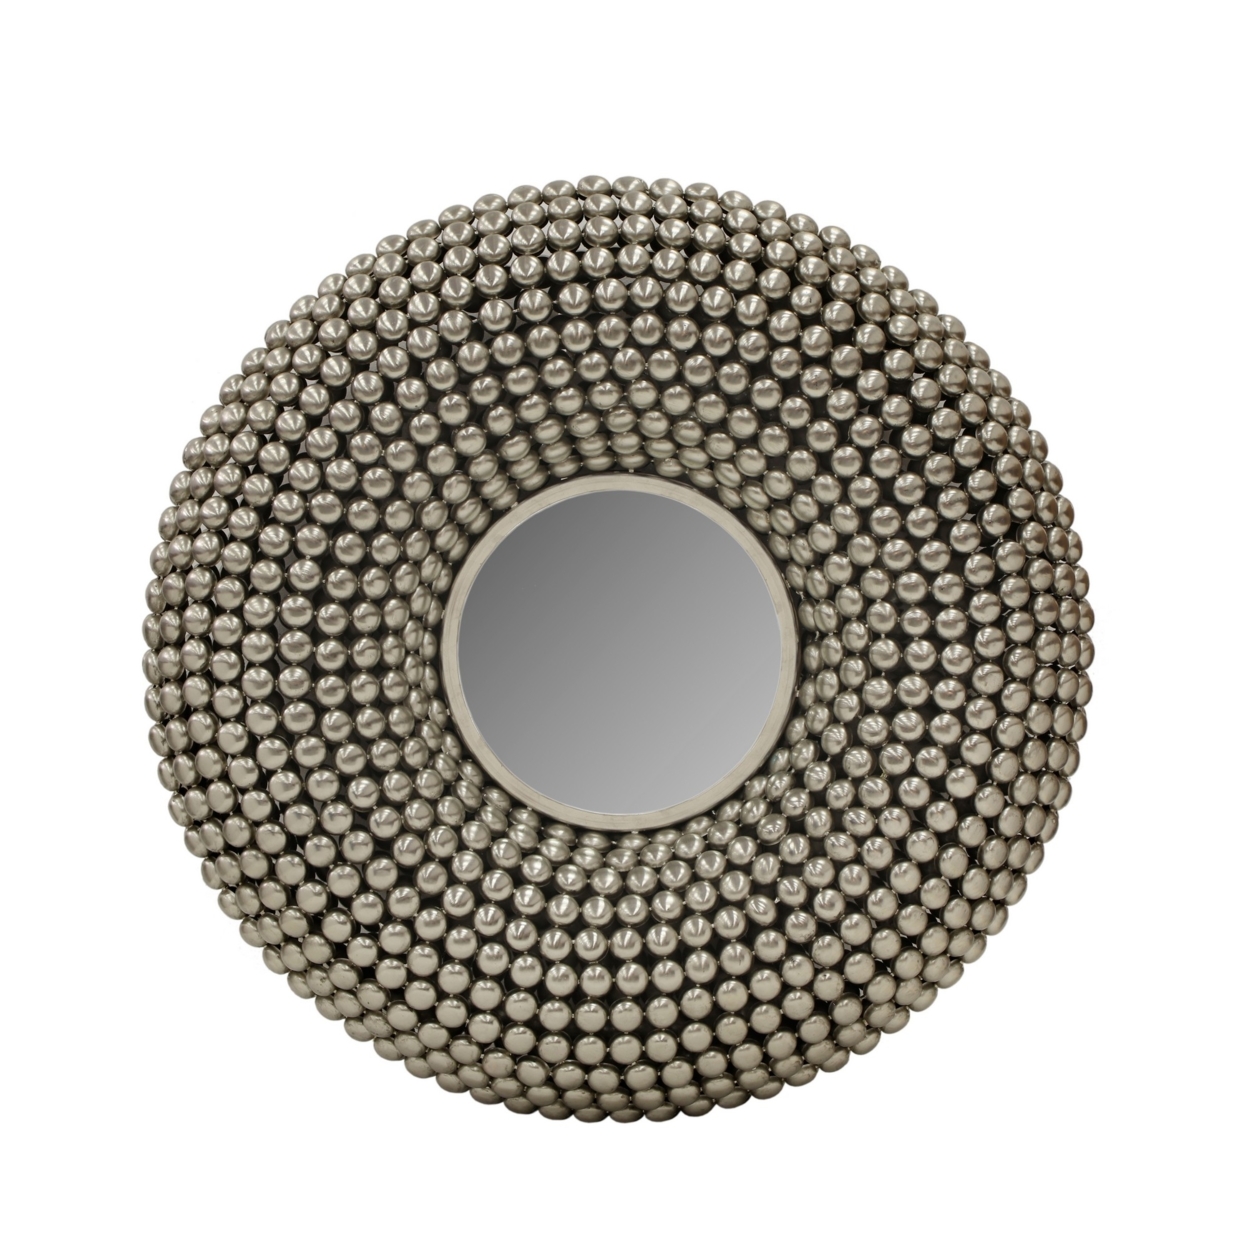 31 Inch Metal Wall Decor With Mirror And Studded Nail Accents, Silver- Saltoro Sherpi